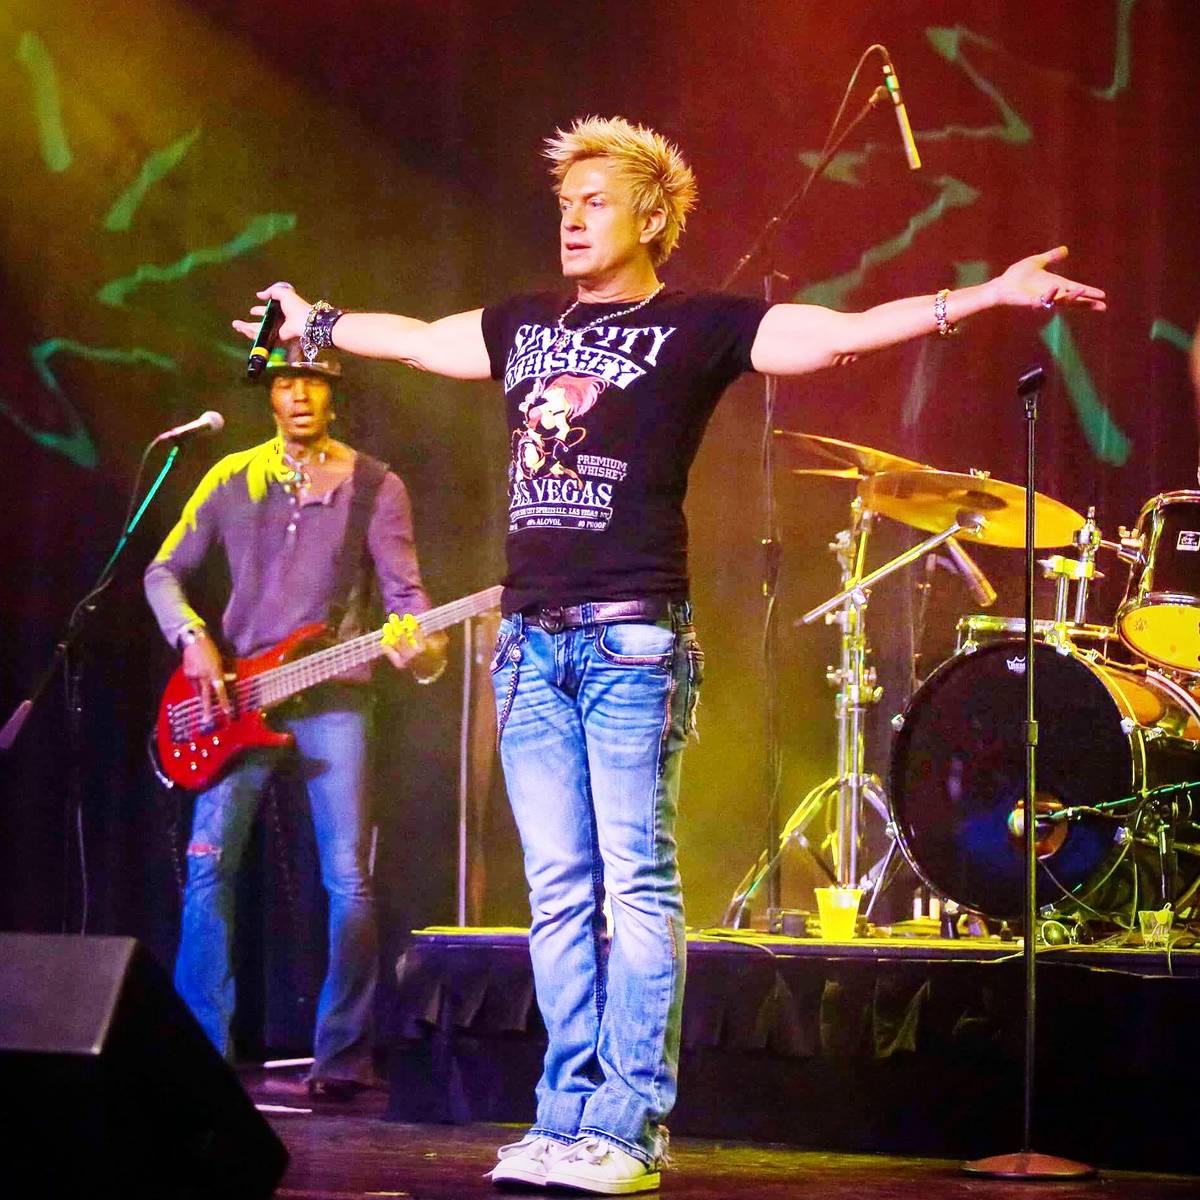 Chris Phillips of Zowie Bowie with band performing in Las Vegas. (Chris Phillips)